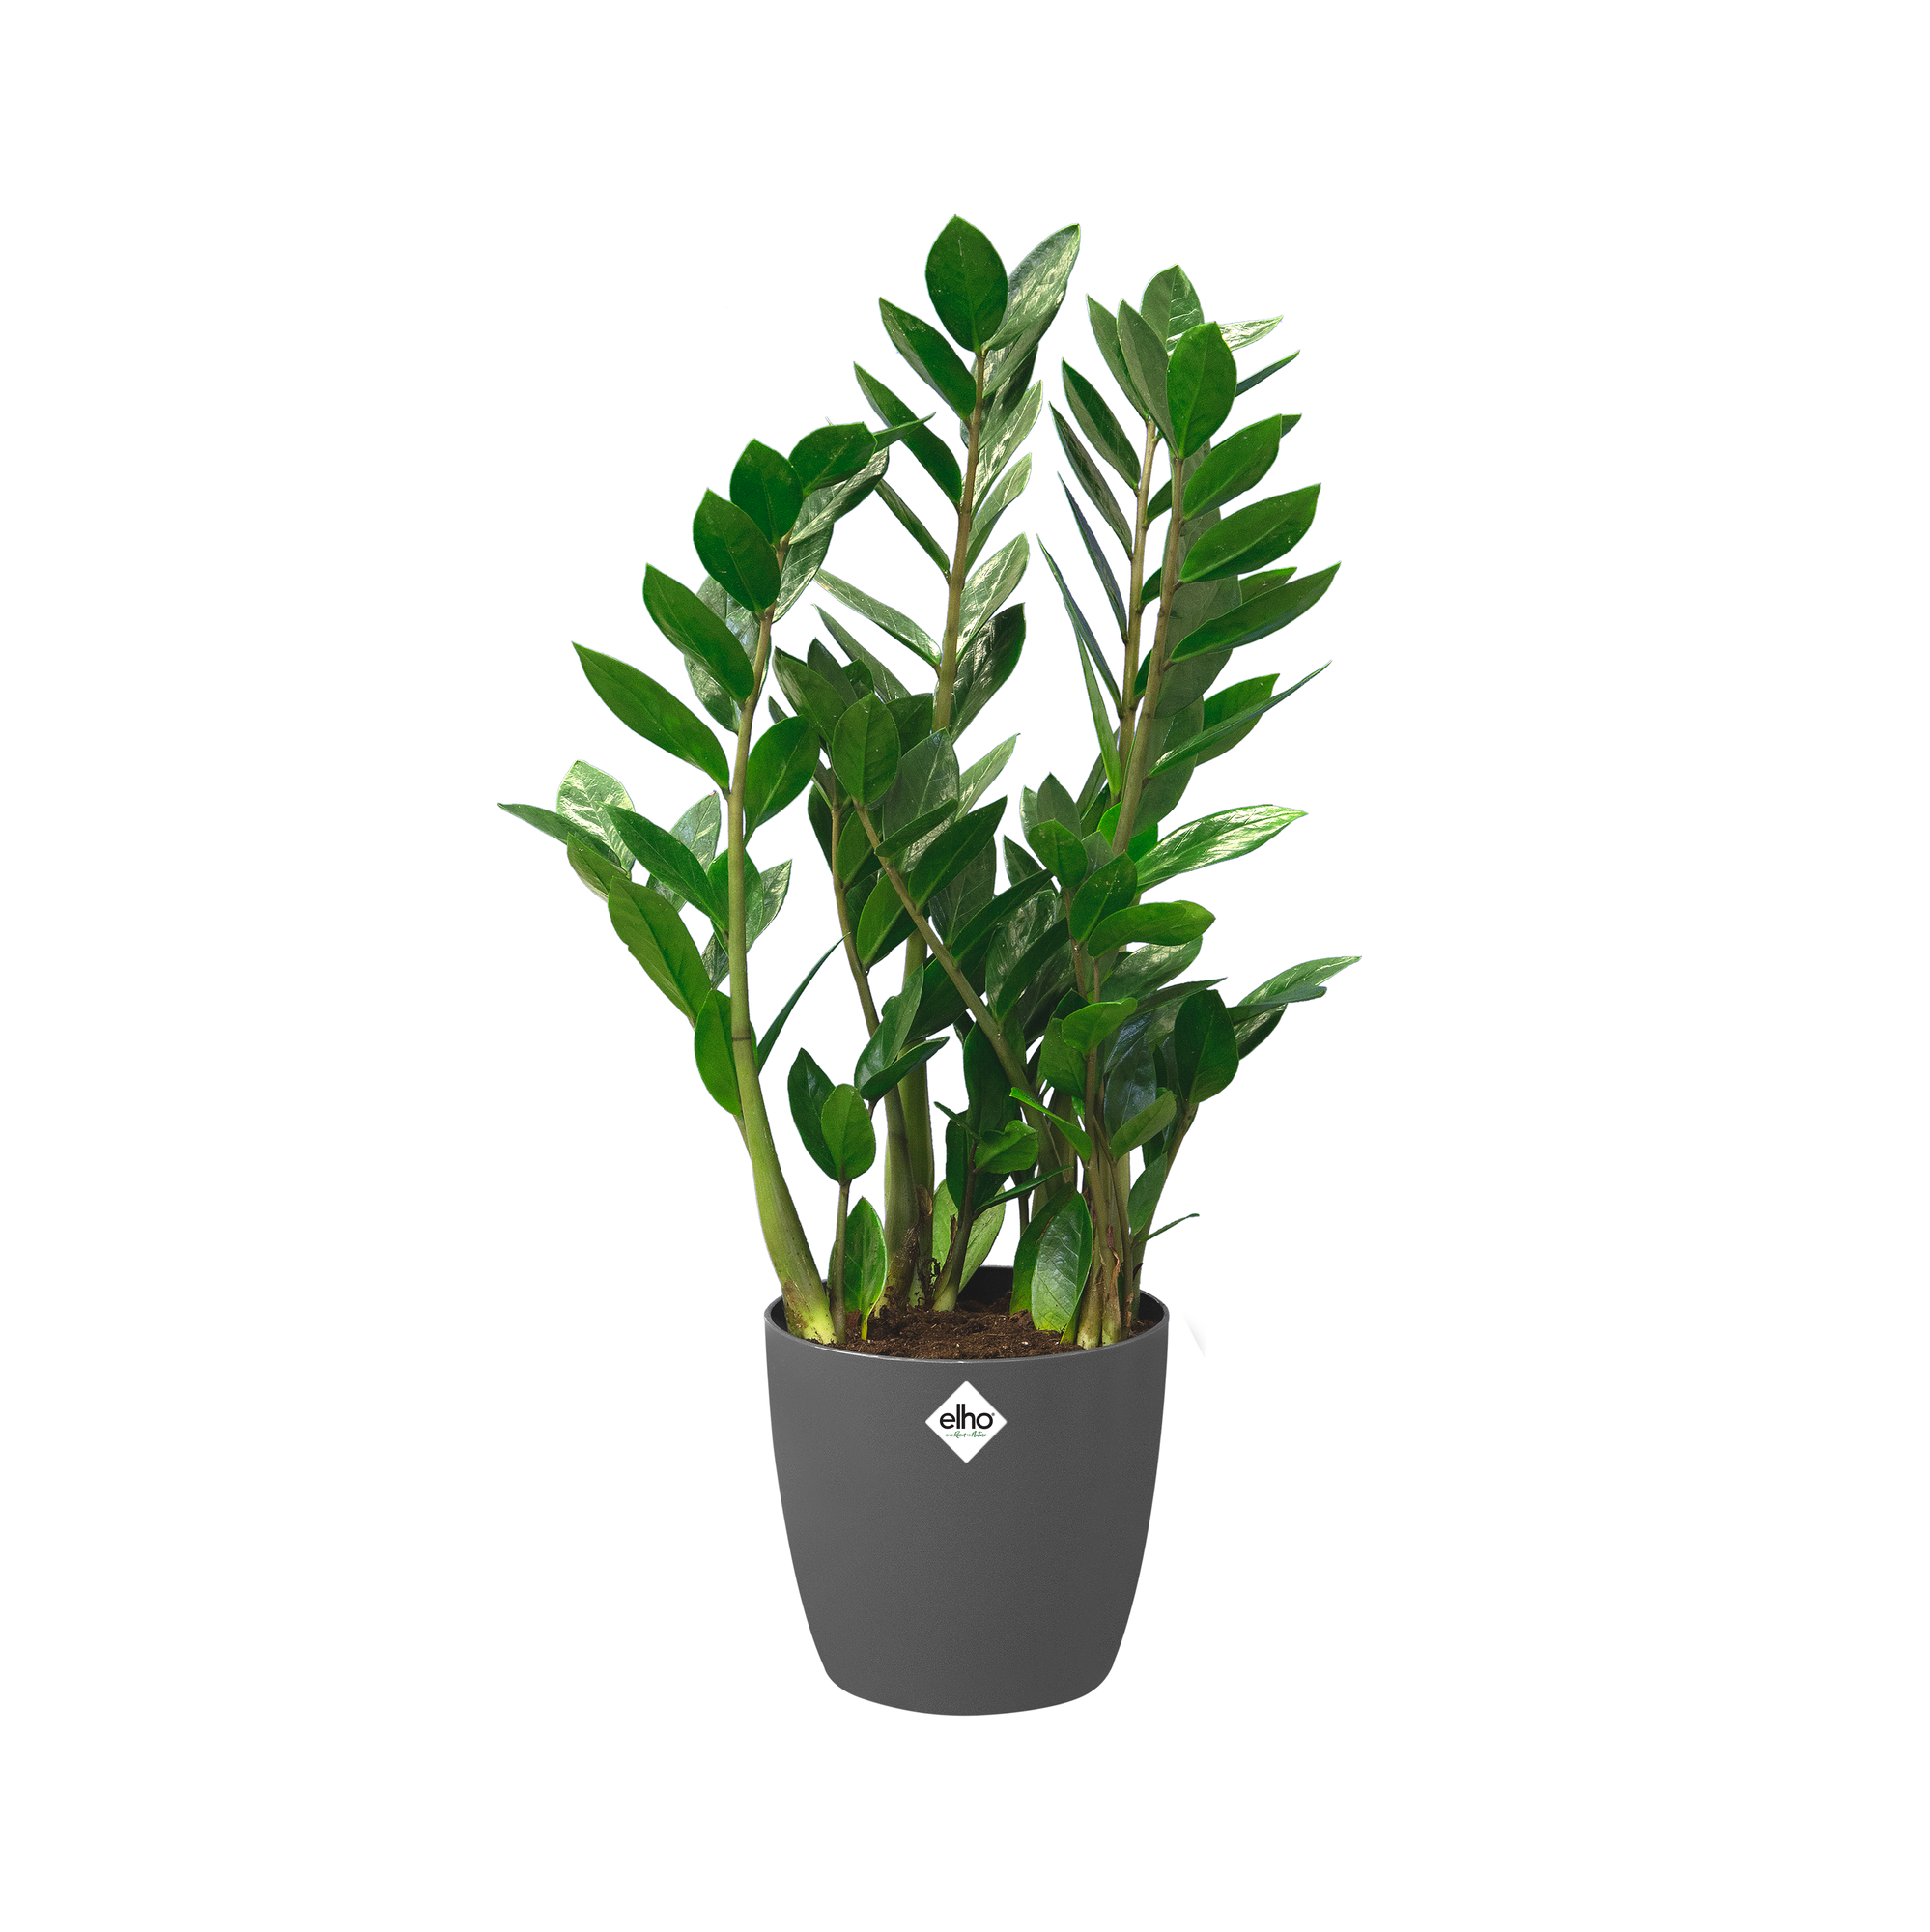 brussels rund to nature - room - 25cm elho® Give anthrazit